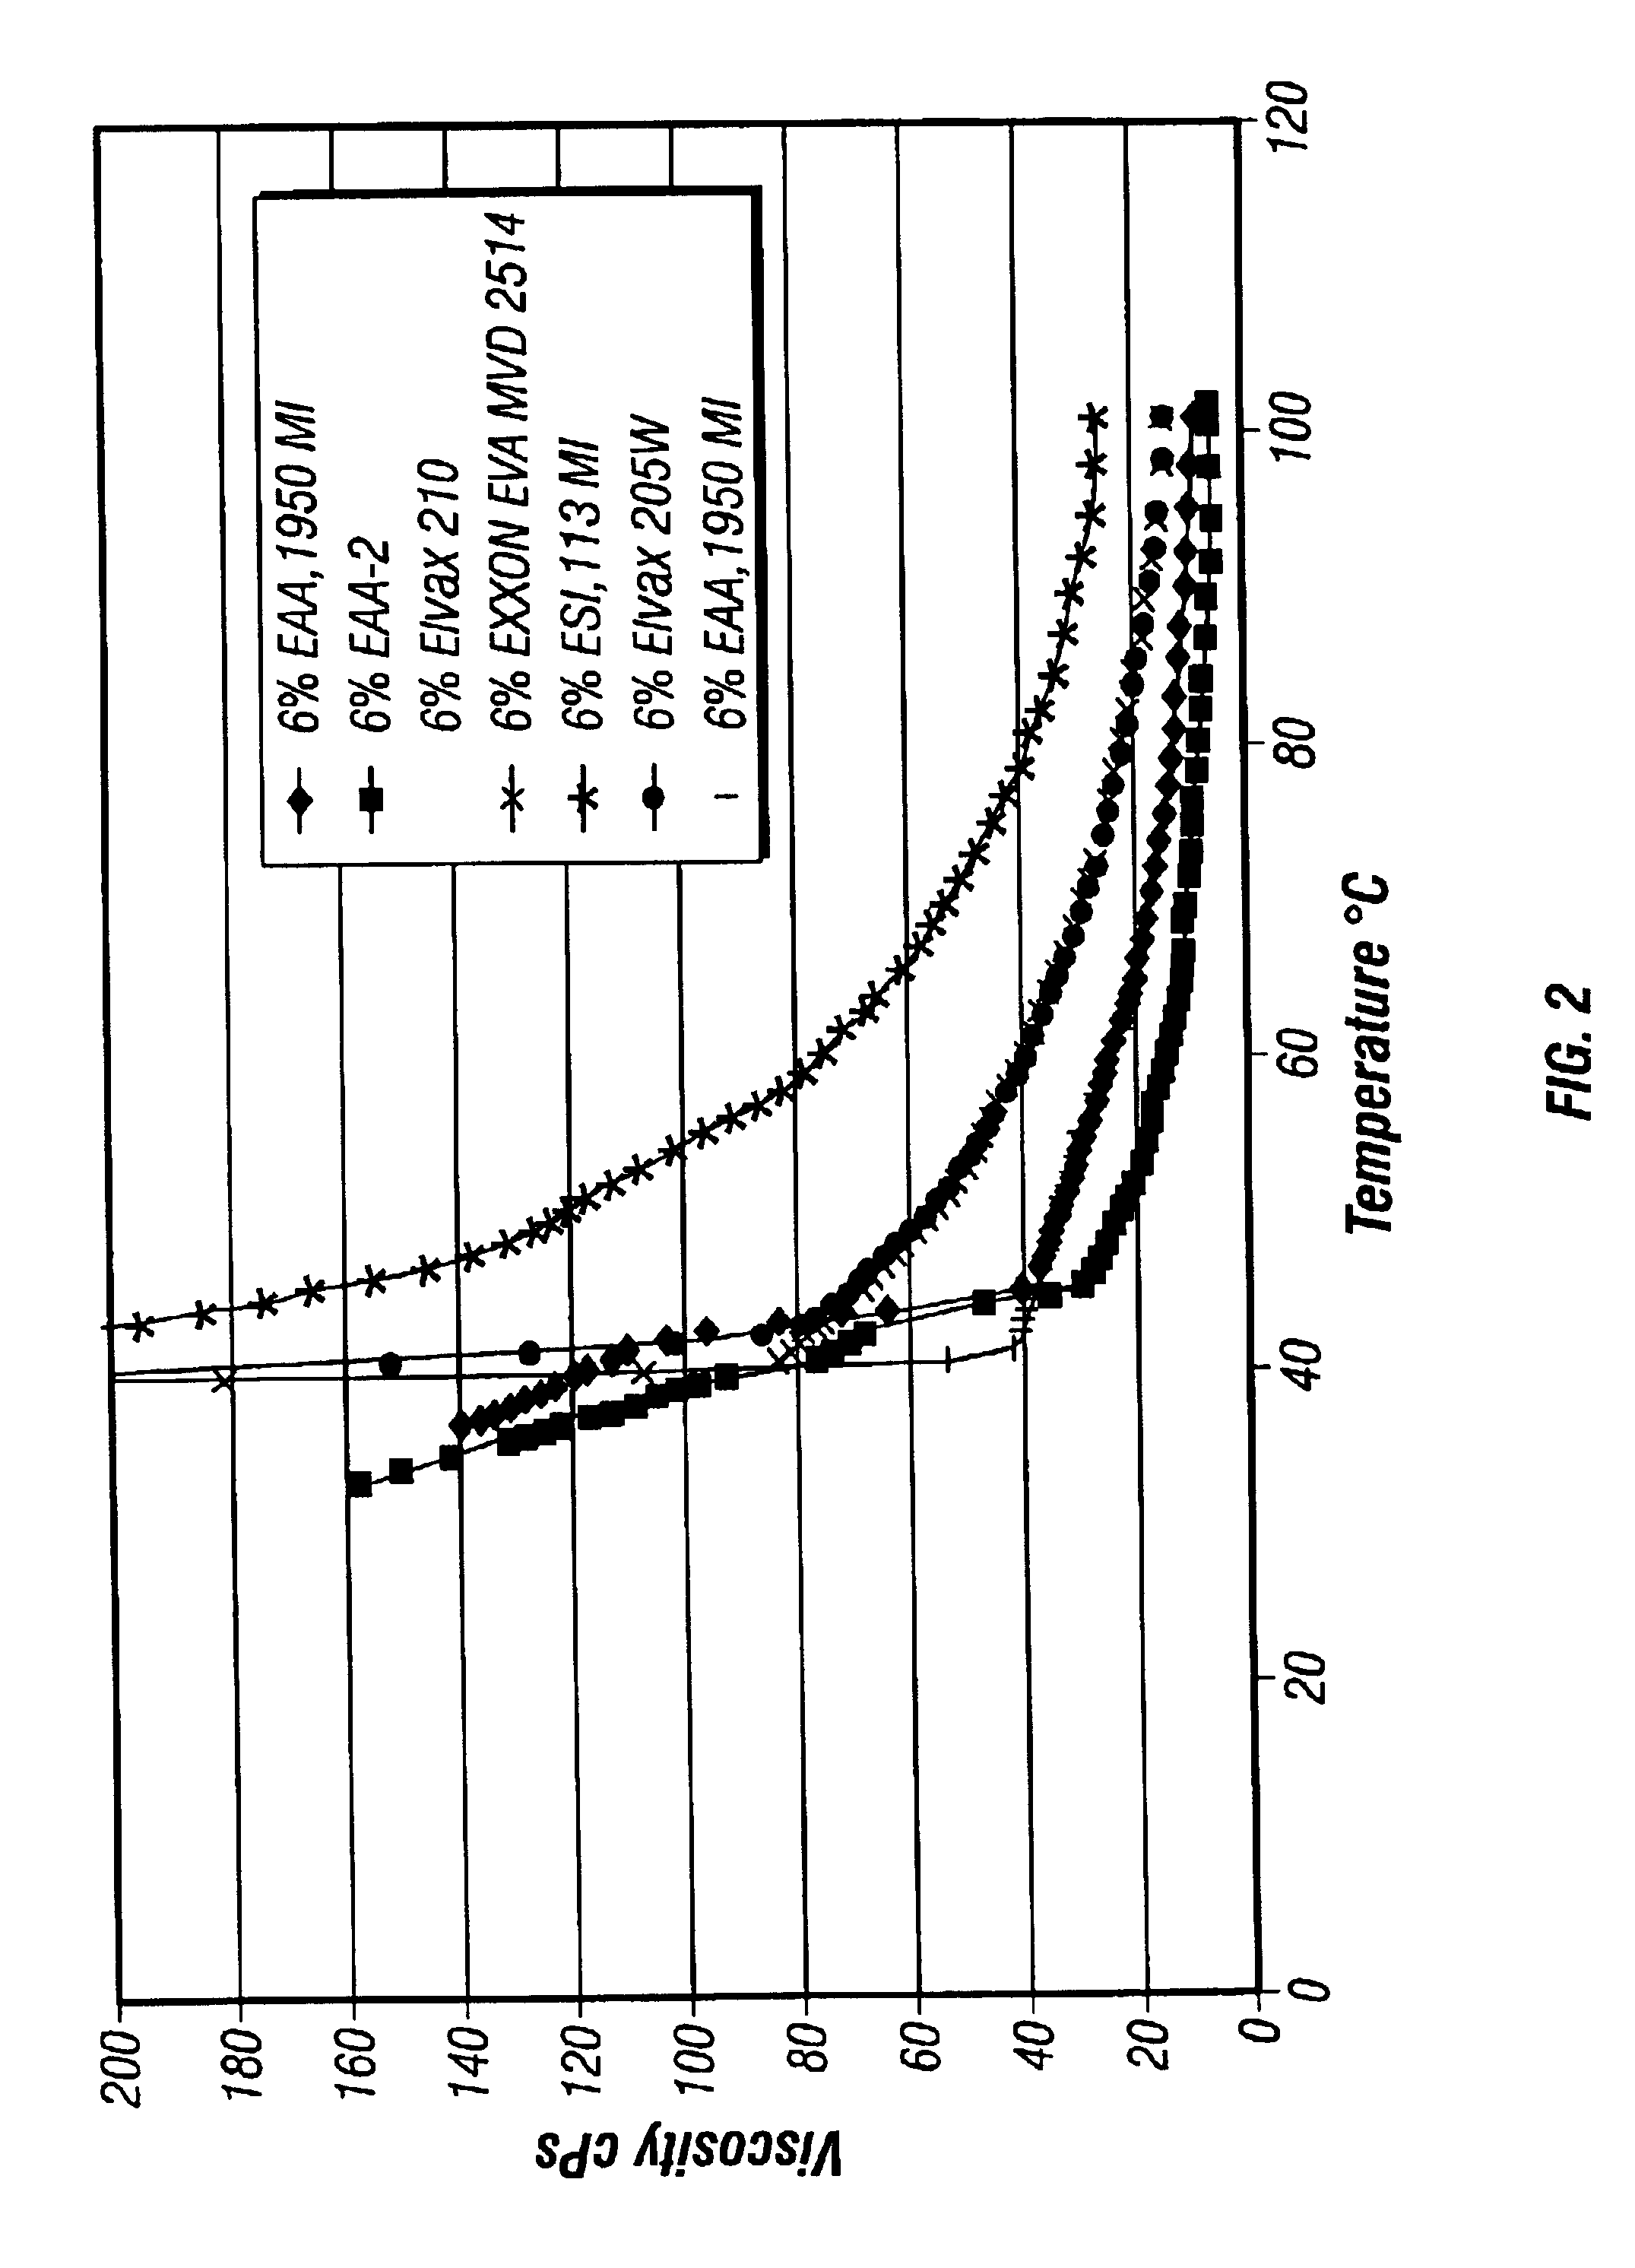 Wood treatment composition and method of use